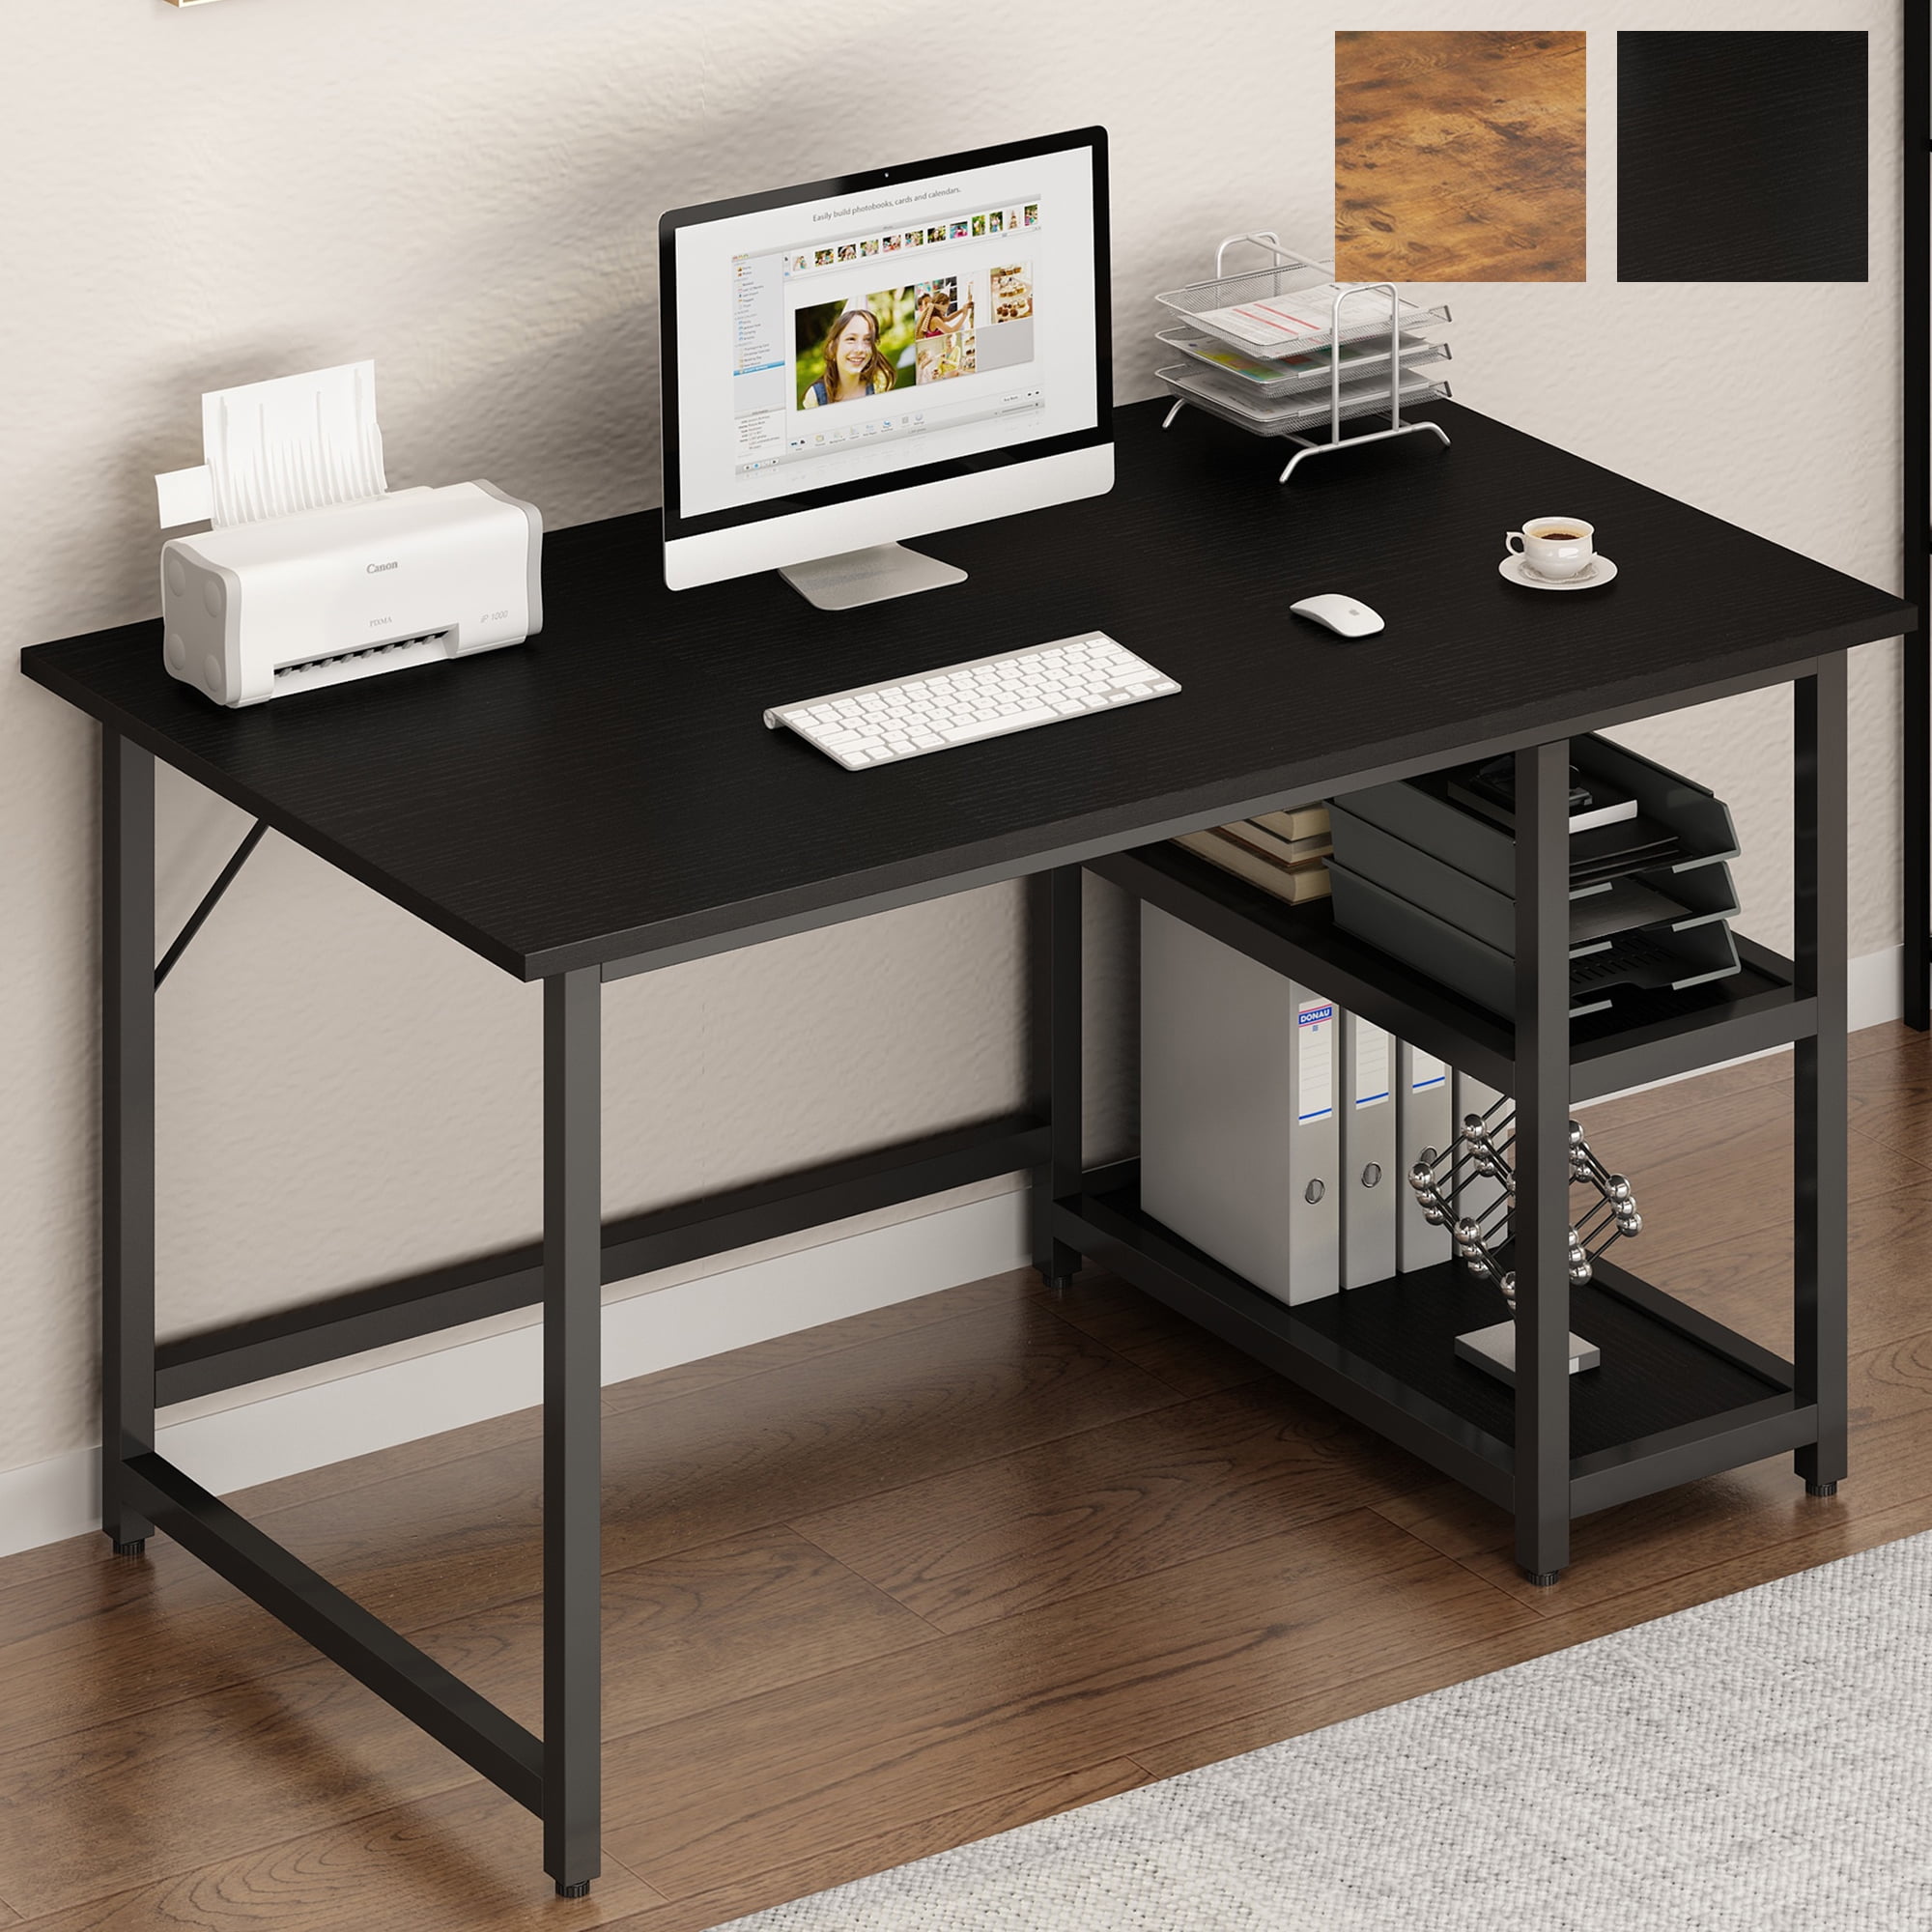 Details about   47.2'' Computer Desk PC Table w/Shelf Study Workstation Home Office Black Friday 